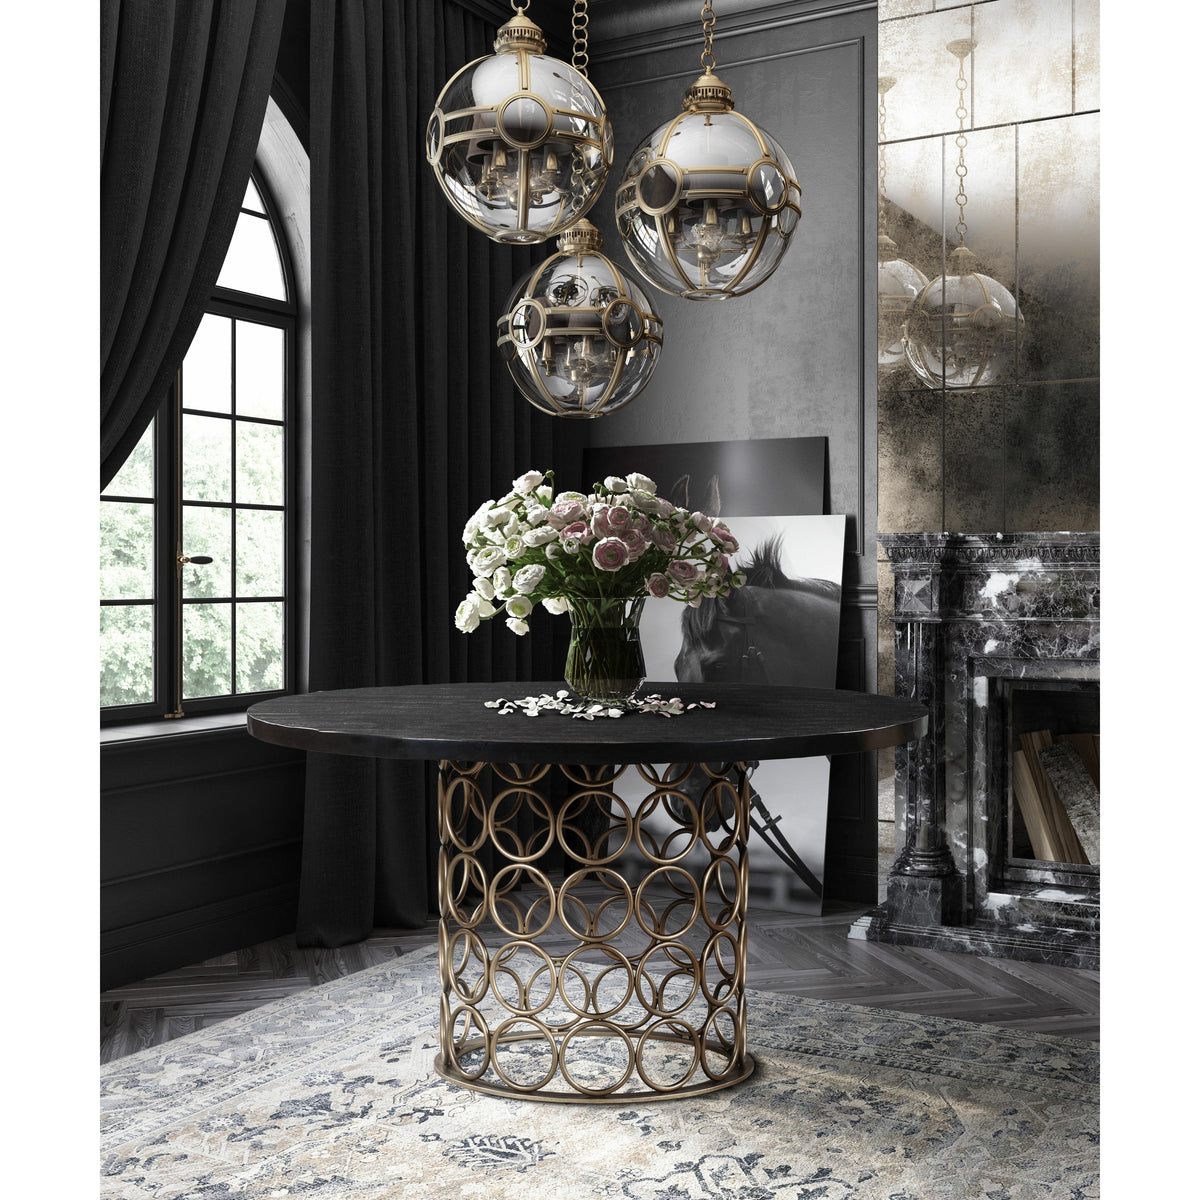 Valentina Brass Round Dining Table Black - Be Bold Furniture